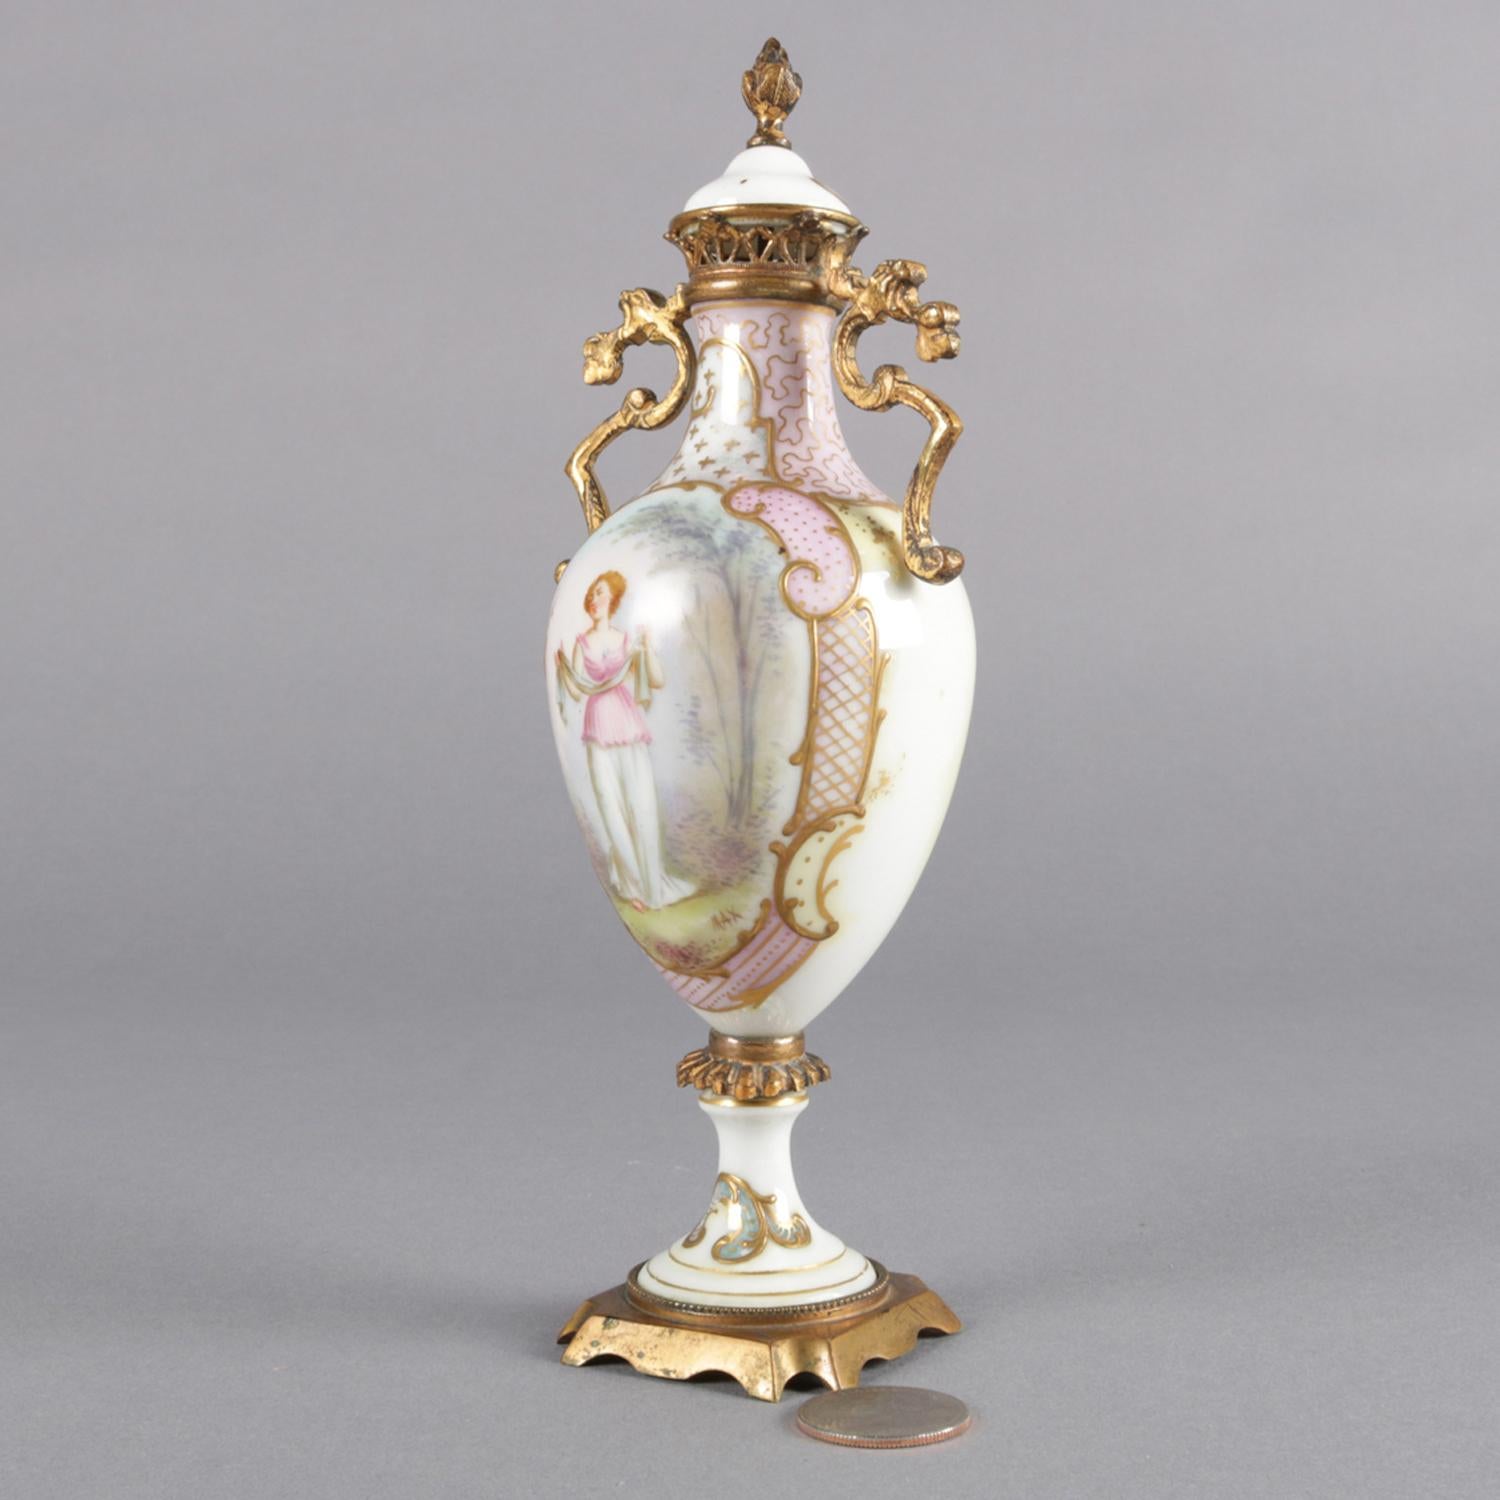 19th Century Antique French Sèvres School Hand-Painted and Gilt Porcelain and Bronze Urn